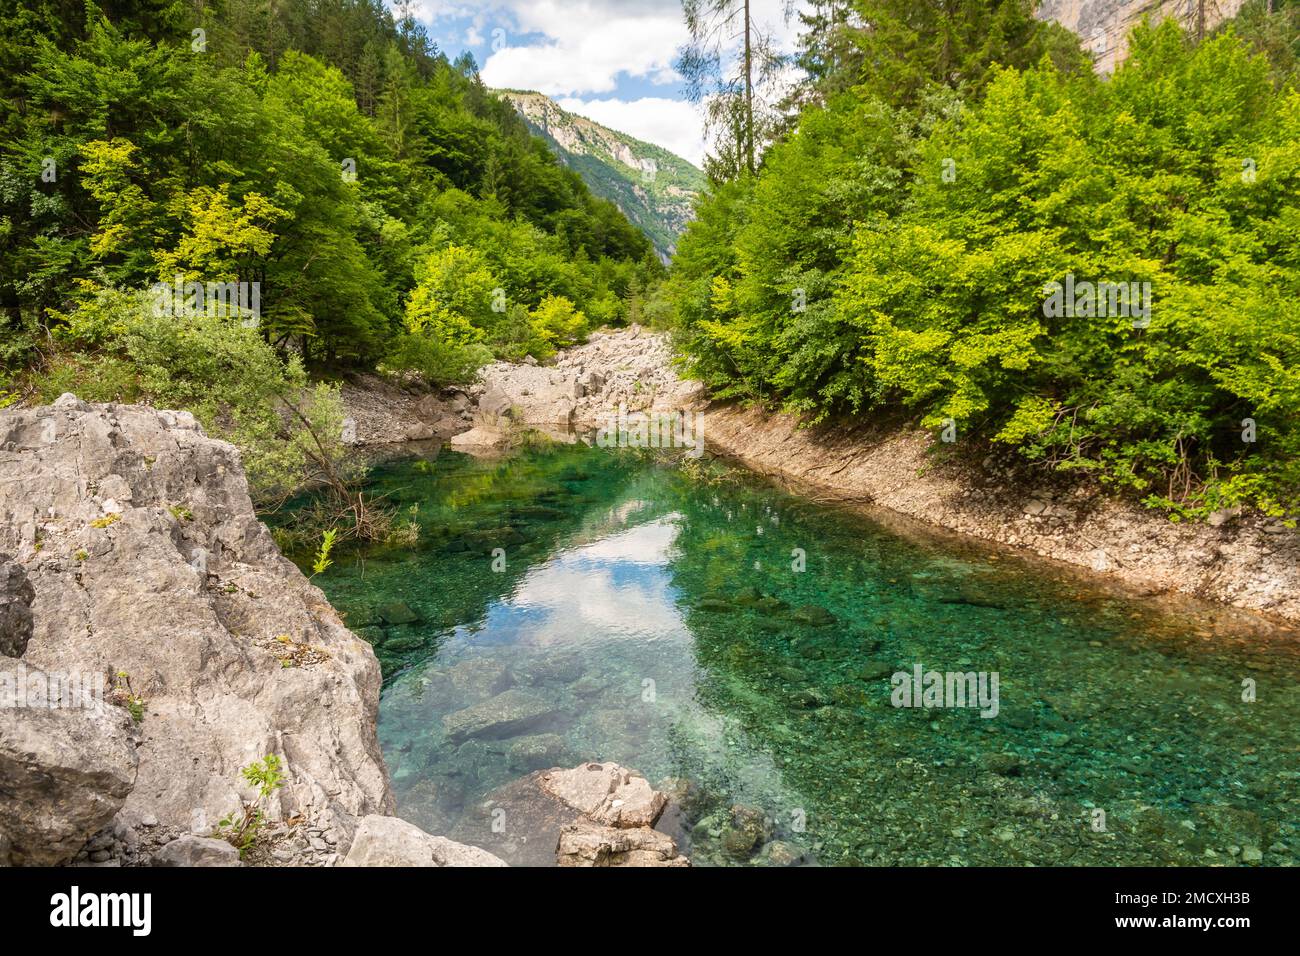 the ephemeral ponds of Tovel: small pearls with turquoise and indigo hues set within the basins of the extensive stony ground of Tovel’s Glares,Italy Stock Photo